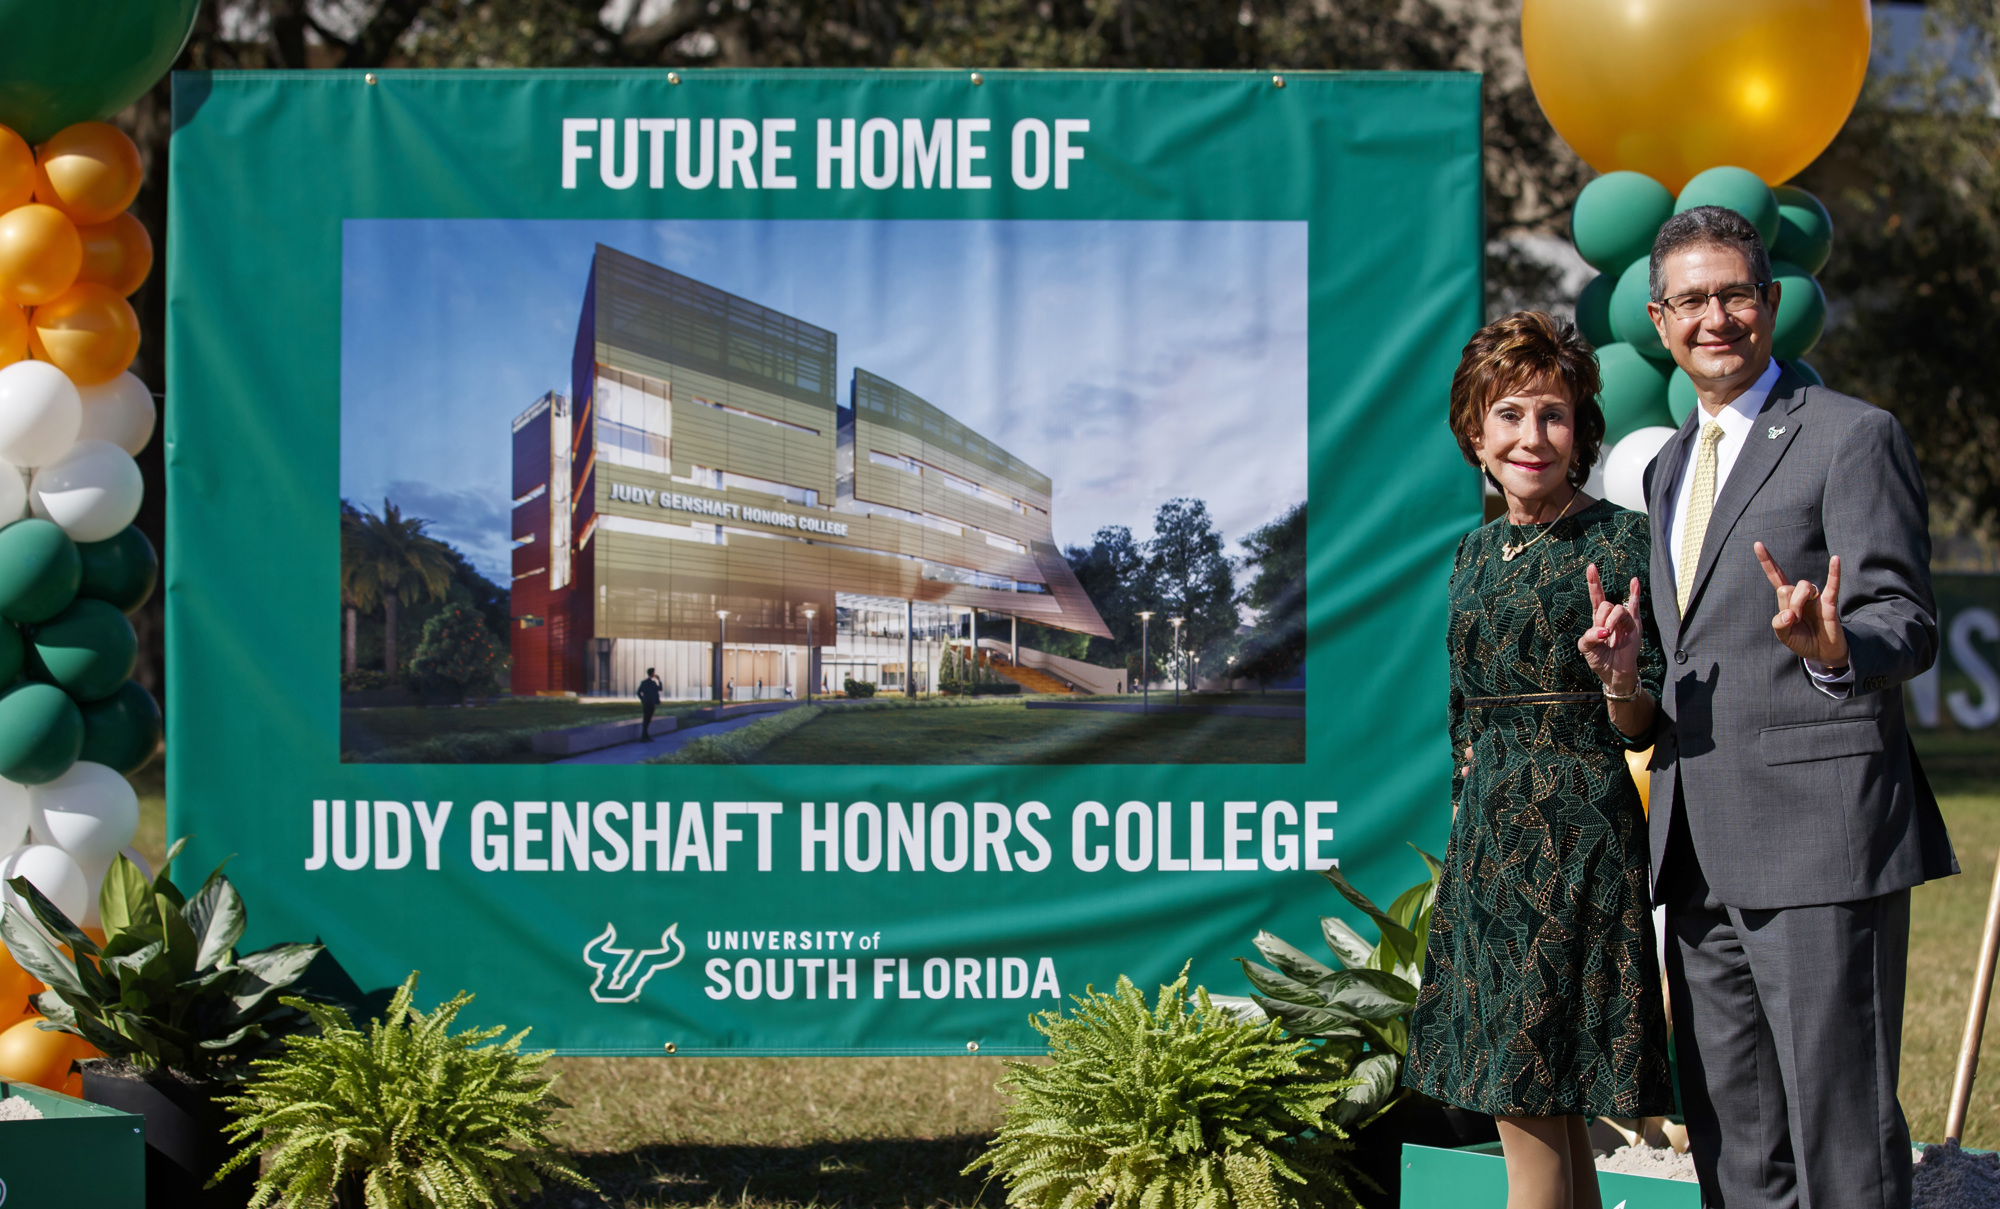 Courtesy. Former USF President Judy Genshaft and her husband, Steve Greenbaum, contributed $20 million to the cost of the new honors college building, expected to open in fall 2022.